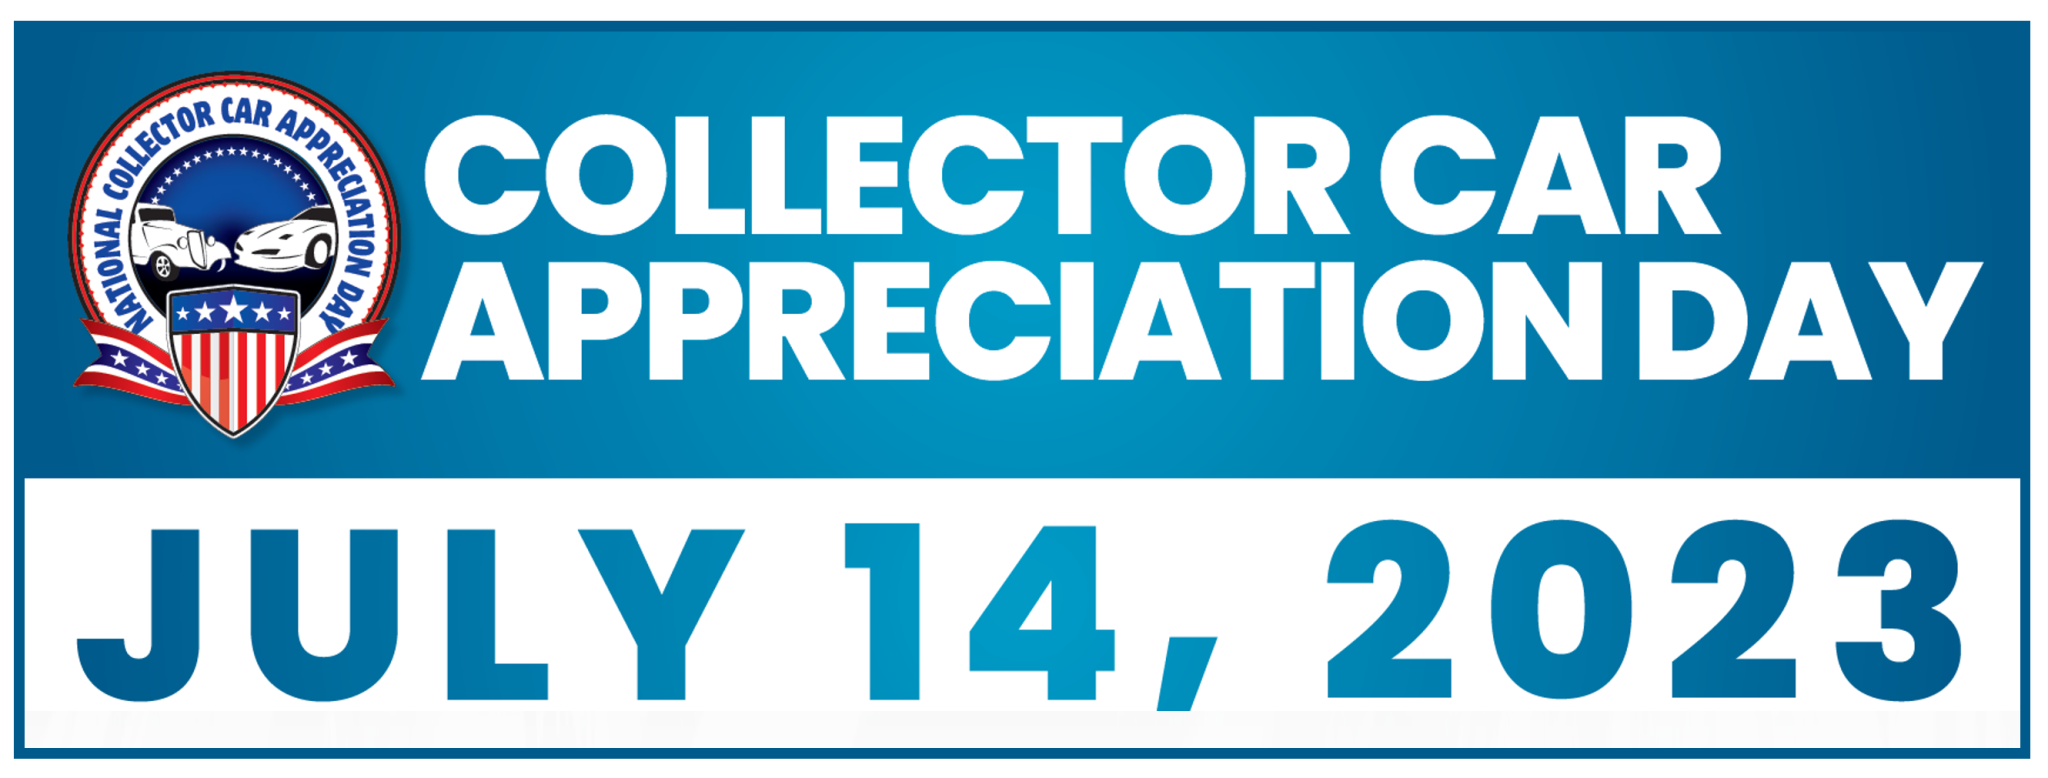 2023 Collector Car Appreciation Day A StatebyState Event List for